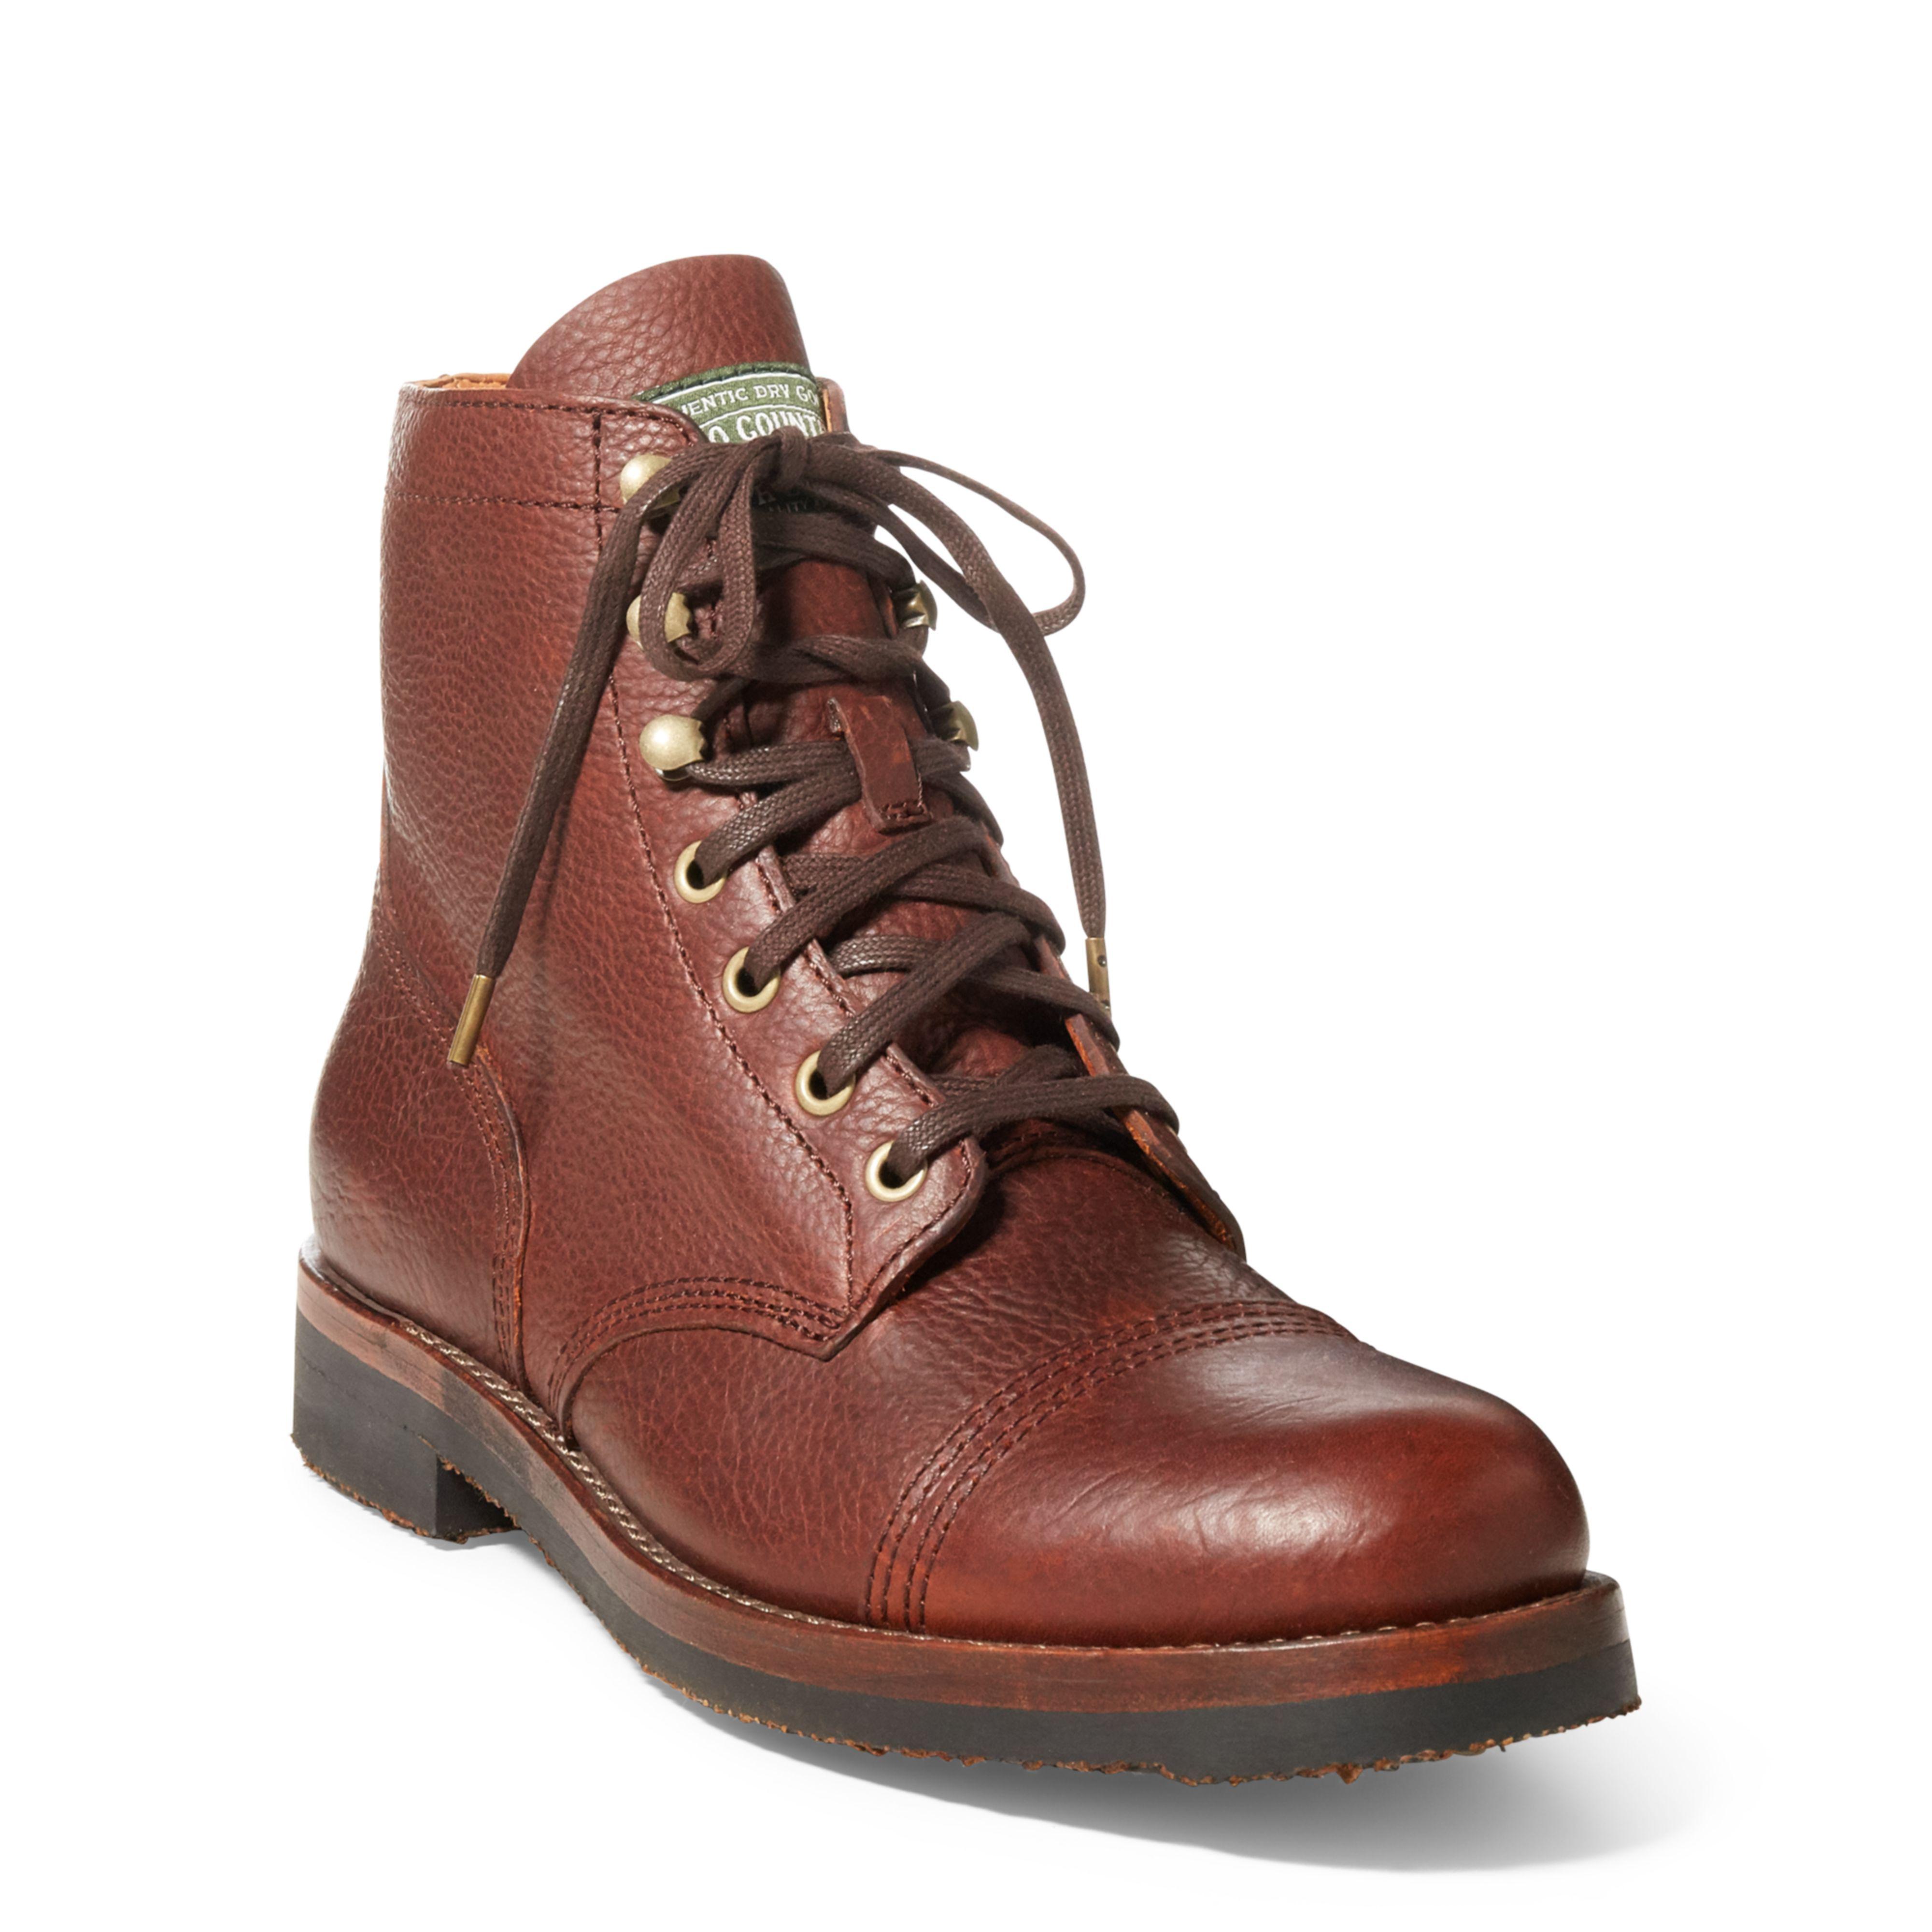 Polo Ralph Lauren Enville Leather Boot in Brown for Men - Lyst